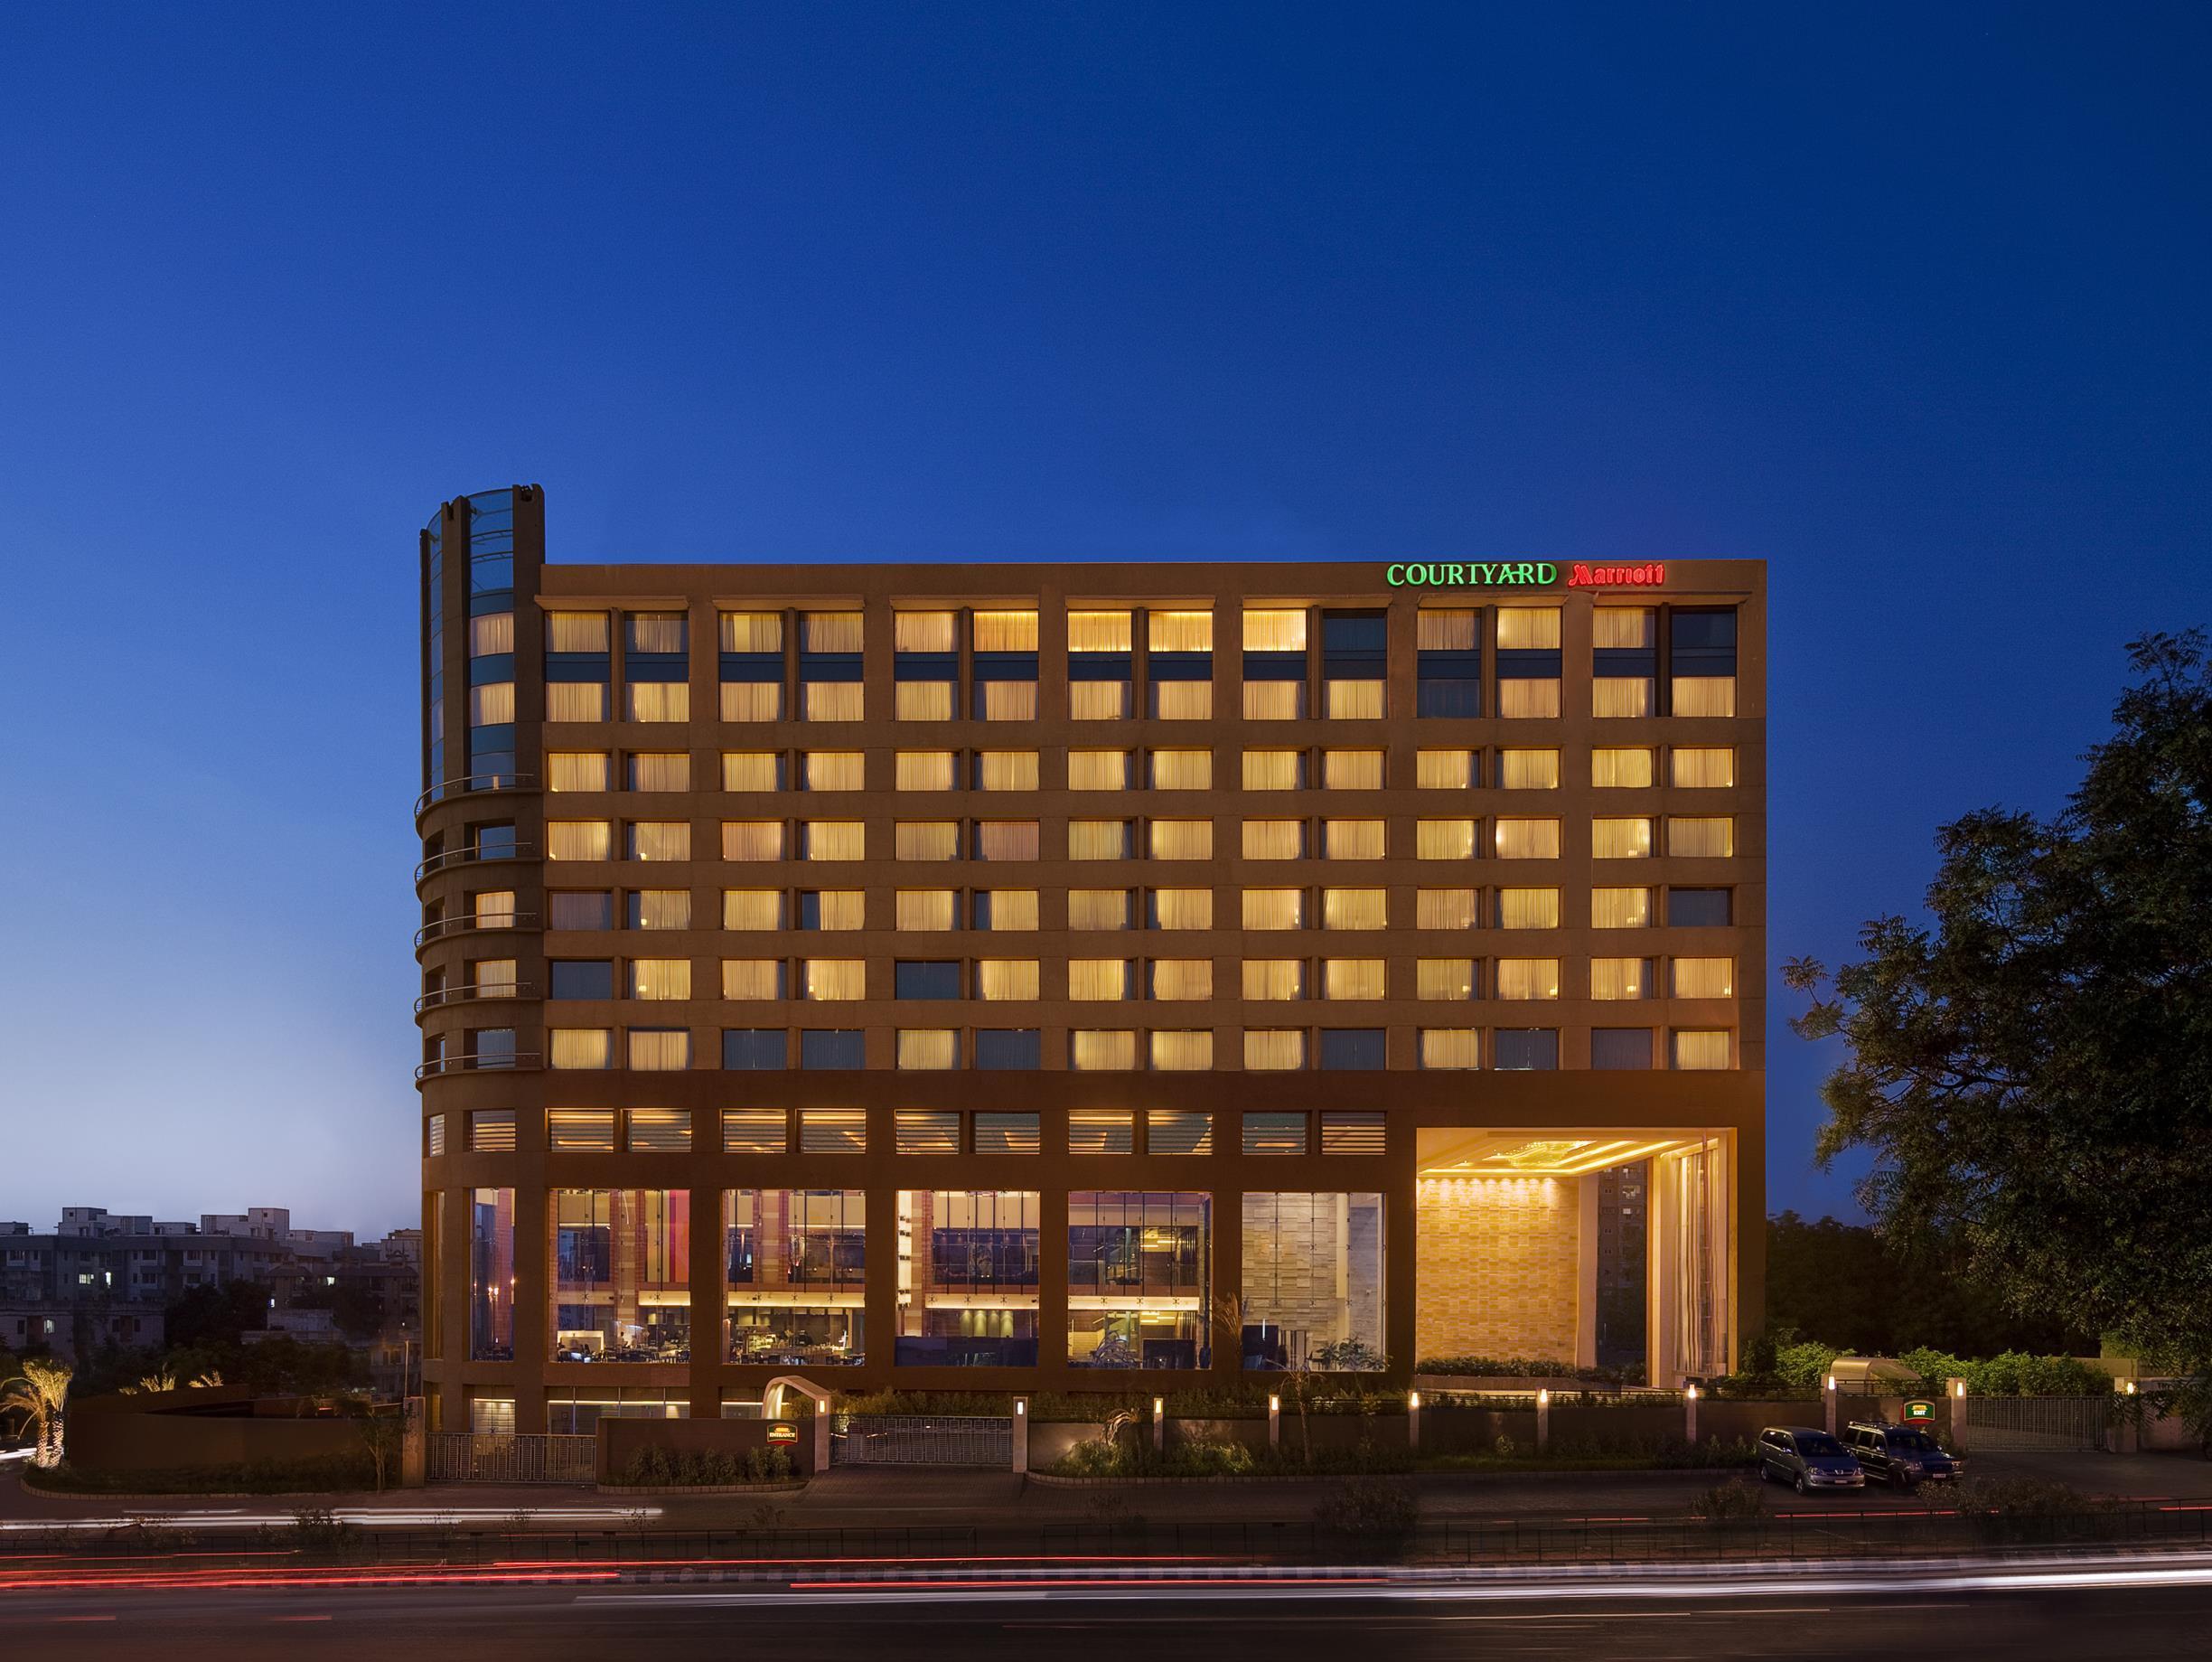 Courtyard By Marriott Ahmedabad Hotel India
 FAQ 2016, What facilities are there in Courtyard By Marriott Ahmedabad Hotel India
 2016, What Languages Spoken are Supported in Courtyard By Marriott Ahmedabad Hotel India
 2016, Which payment cards are accepted in Courtyard By Marriott Ahmedabad Hotel India
 , India
 Courtyard By Marriott Ahmedabad Hotel room facilities and services Q&A 2016, India
 Courtyard By Marriott Ahmedabad Hotel online booking services 2016, India
 Courtyard By Marriott Ahmedabad Hotel address 2016, India
 Courtyard By Marriott Ahmedabad Hotel telephone number 2016,India
 Courtyard By Marriott Ahmedabad Hotel map 2016, India
 Courtyard By Marriott Ahmedabad Hotel traffic guide 2016, how to go India
 Courtyard By Marriott Ahmedabad Hotel, India
 Courtyard By Marriott Ahmedabad Hotel booking online 2016, India
 Courtyard By Marriott Ahmedabad Hotel room types 2016.